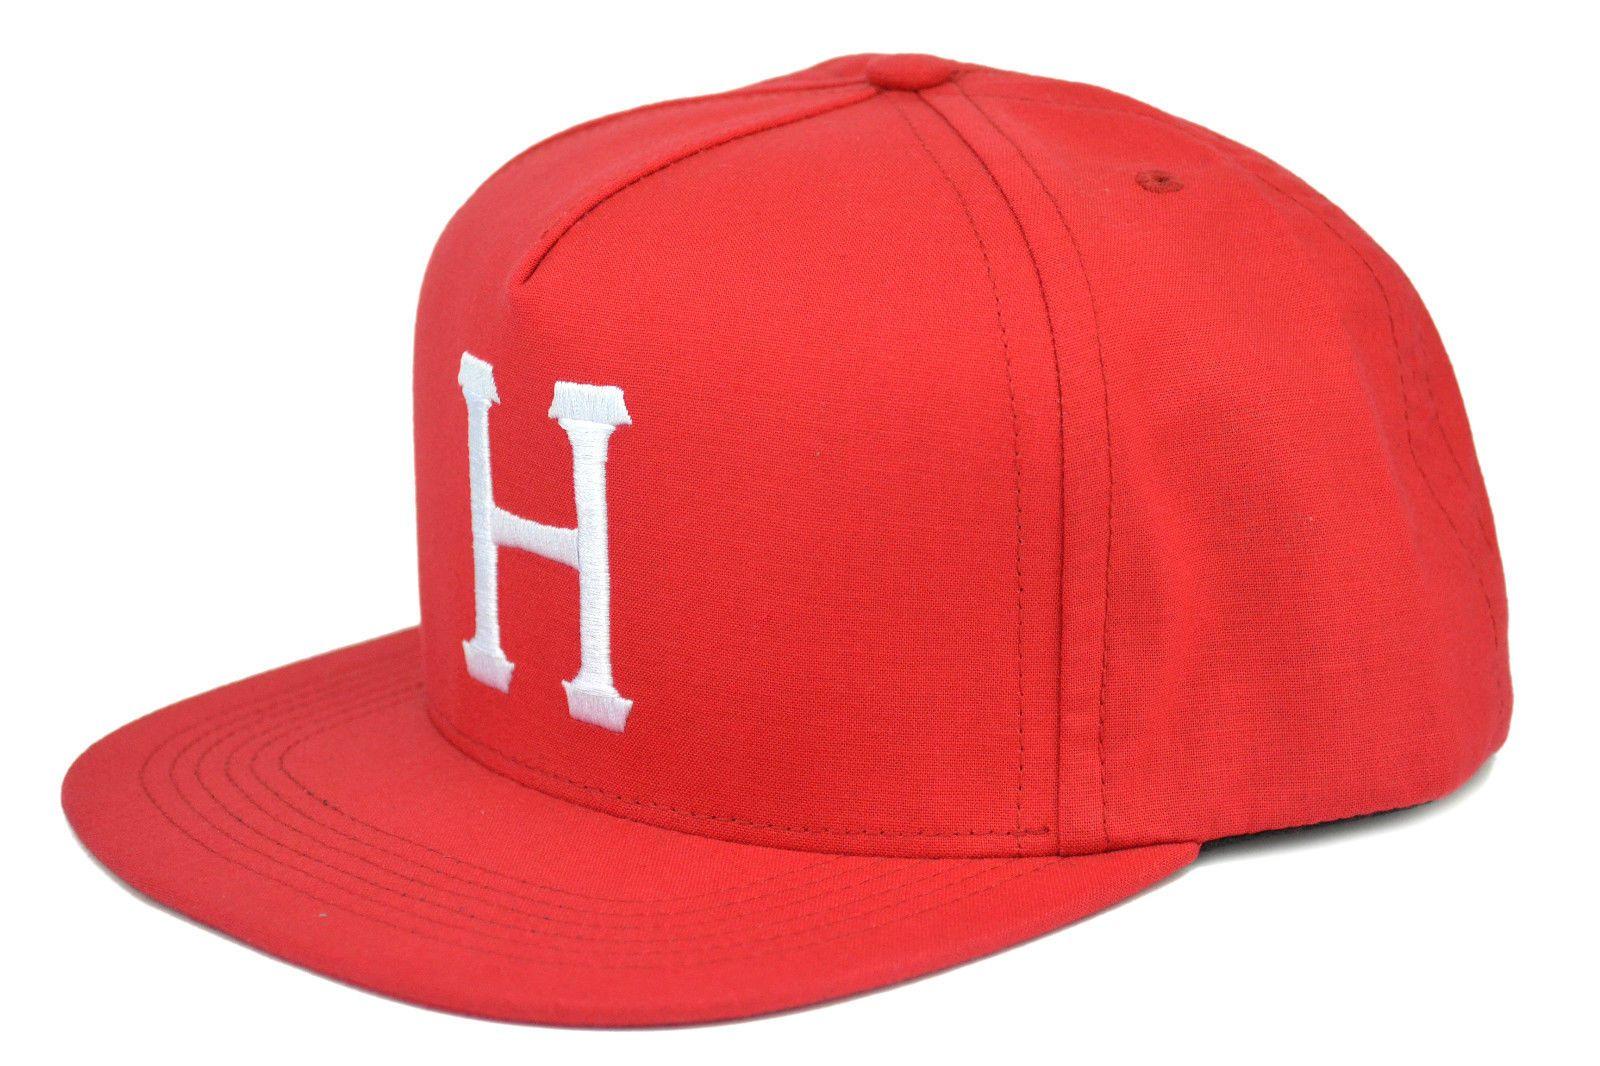 HUF H Logo - HUF - THE CLASSIC H LOGO AUTHENTIC SNAPBACK CAP - RED AUTHENTIC LOGO ...